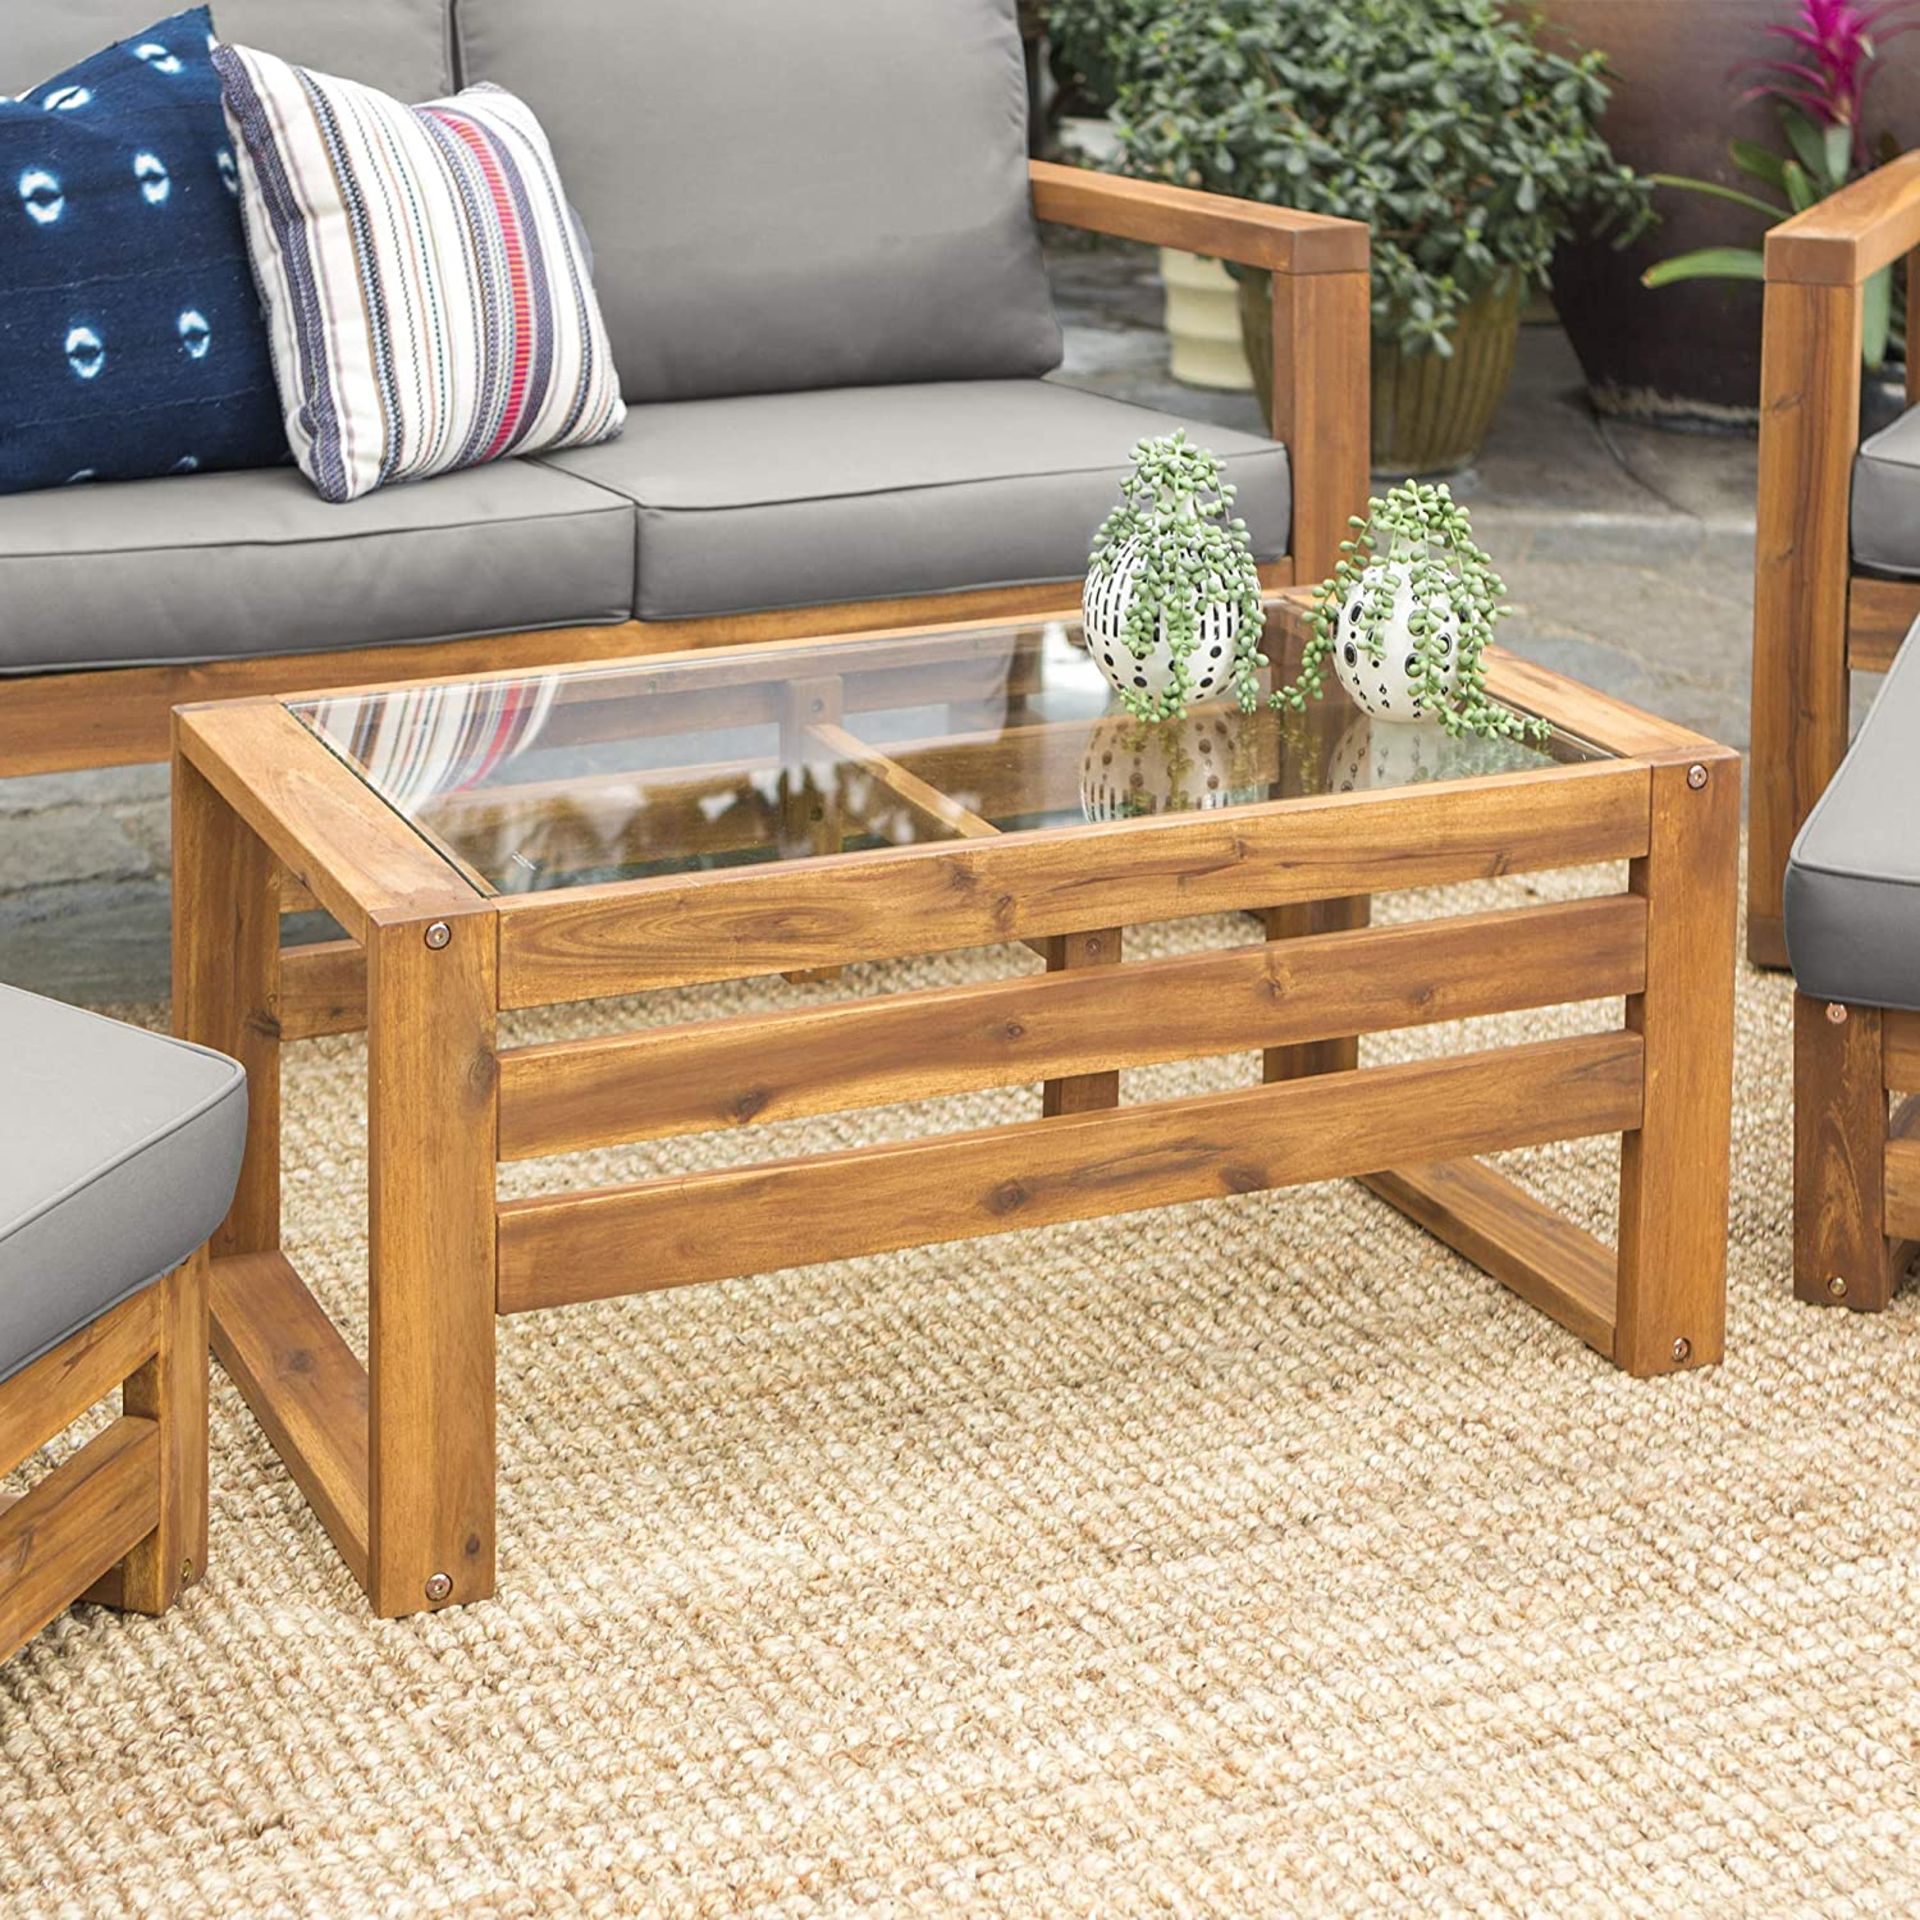 A1 PRODUCT NEW - WALKER EDISON SORRENTO MODERN ACACIA WOODEN GLASS TOPPED OUTDOOR COFFEE TABLE - R